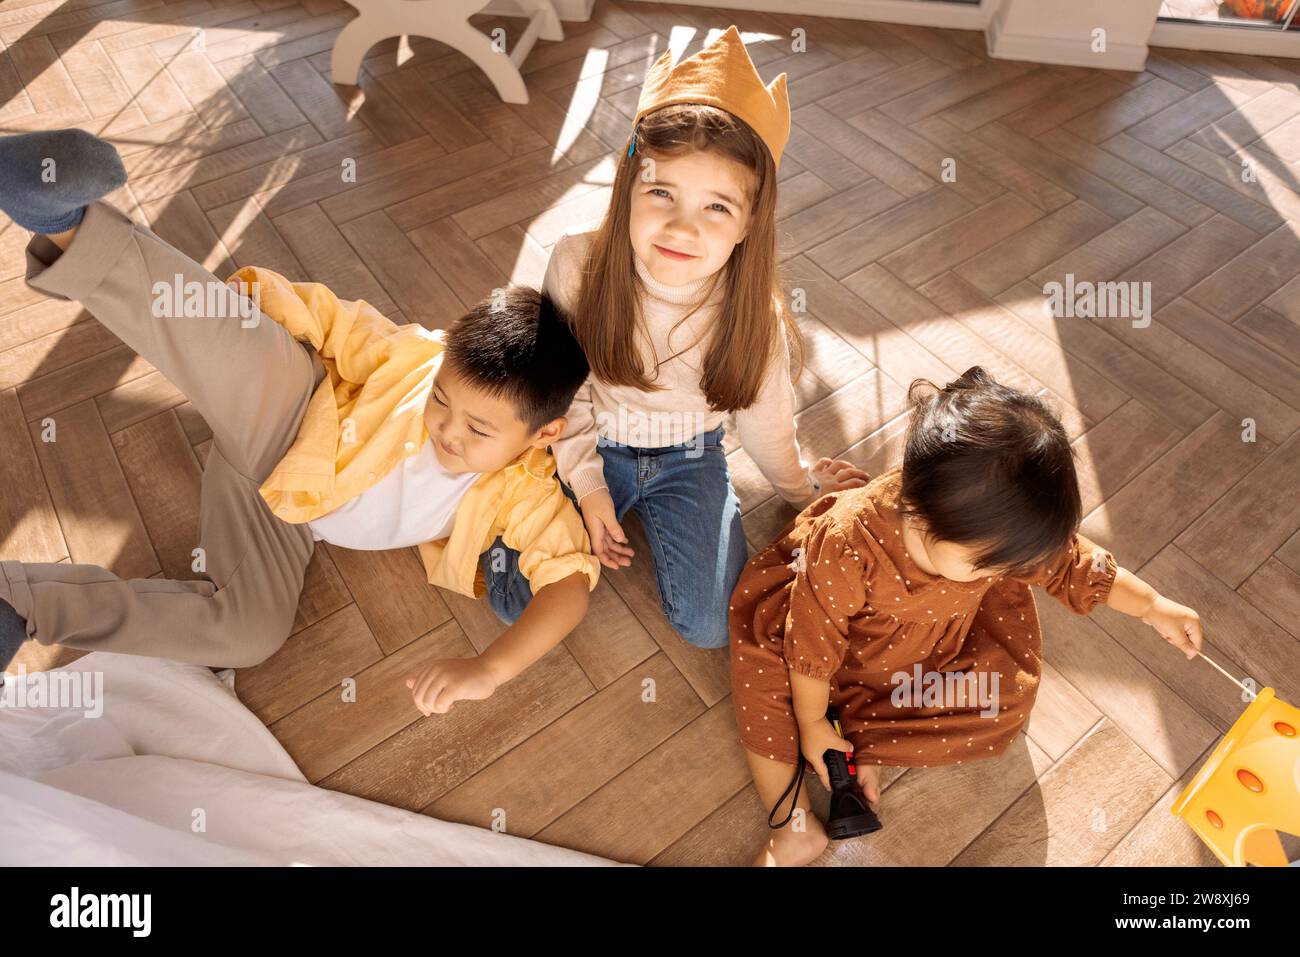 Cute children of different races play together. Asian sibling and caucasian girl are messing around in the bedroom on the floor. Small children have f Stock Photo